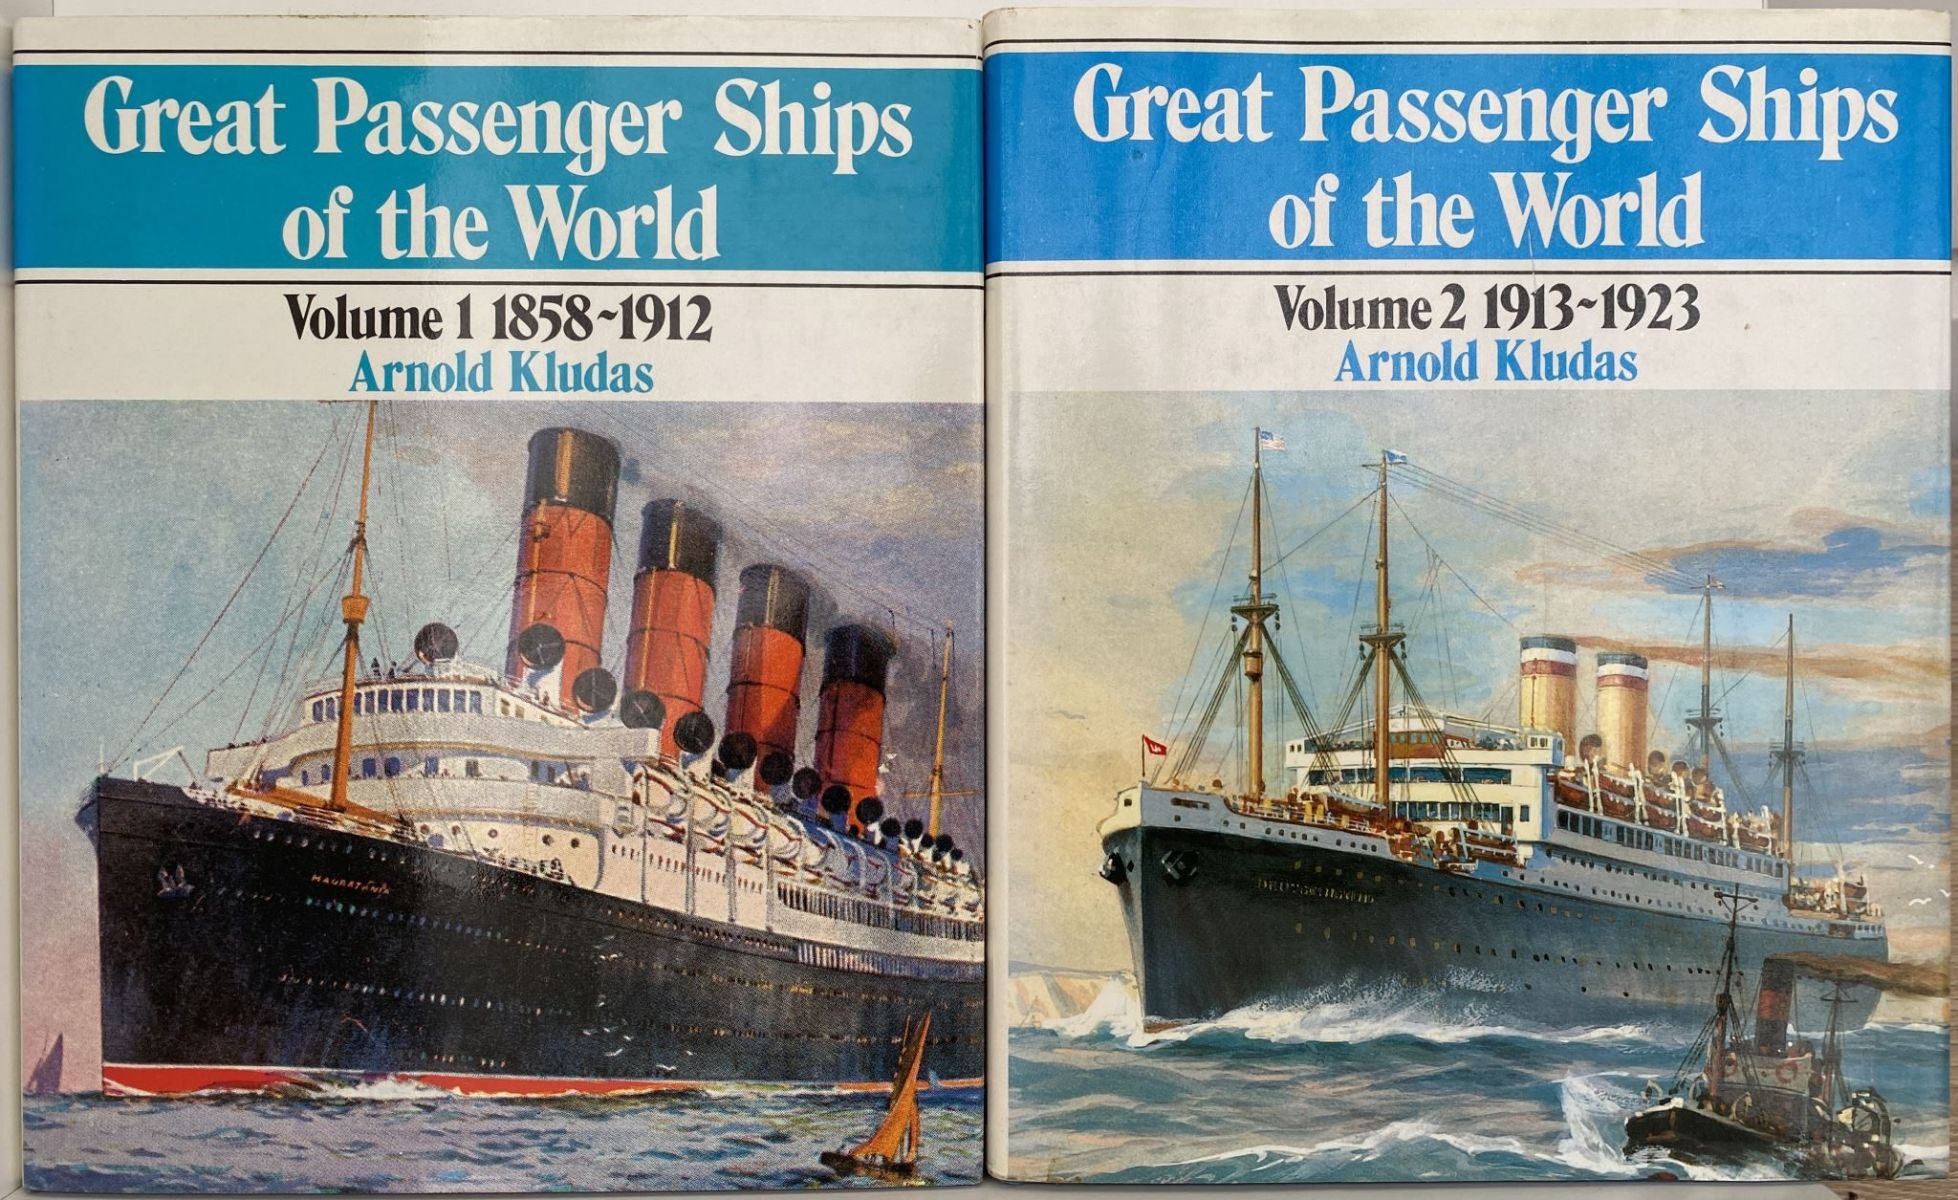 GREAT PASSENGER SHIPS OF THE WORLD 1858 to 1923